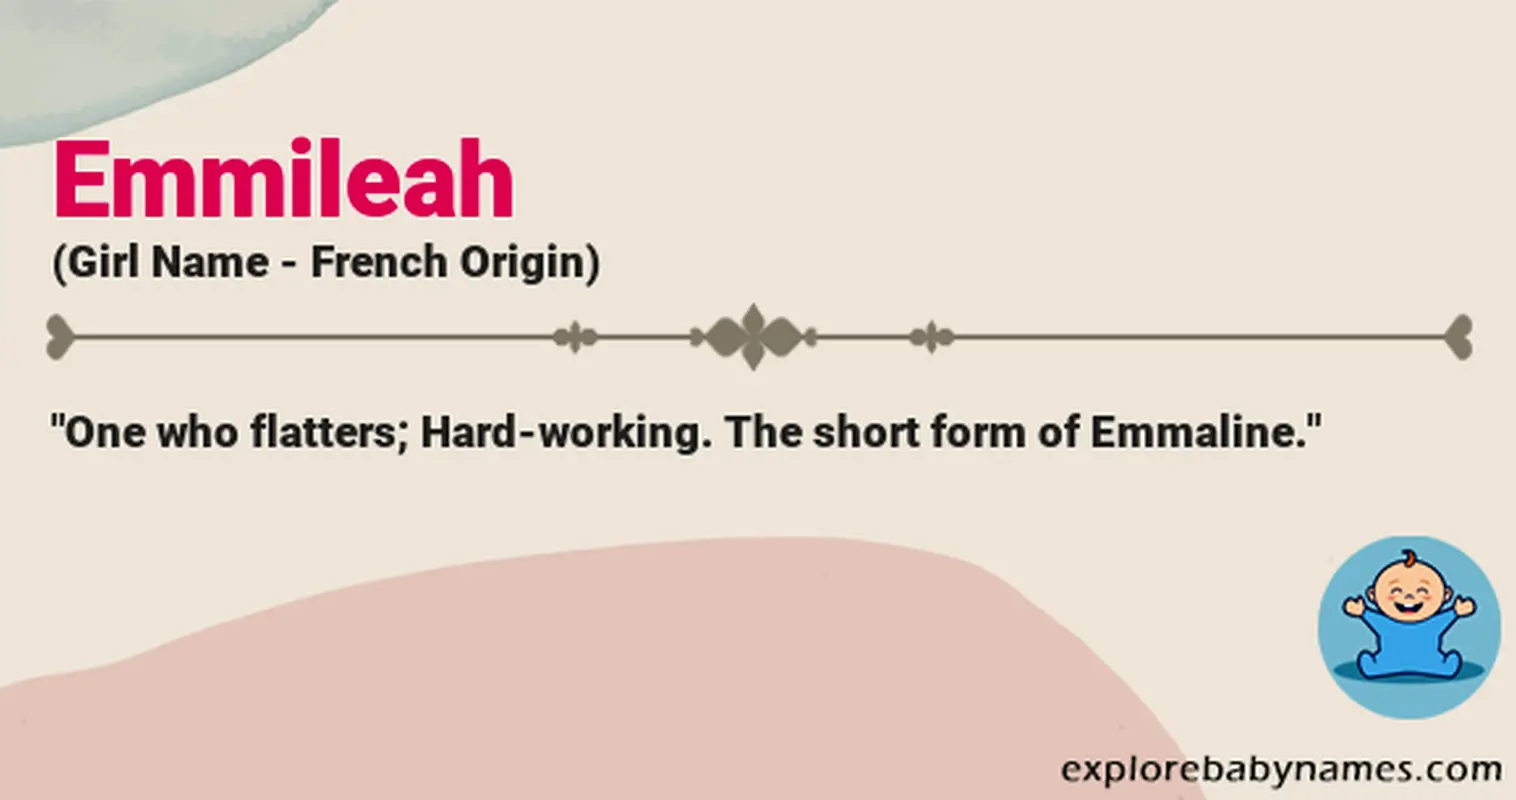 Meaning of Emmileah